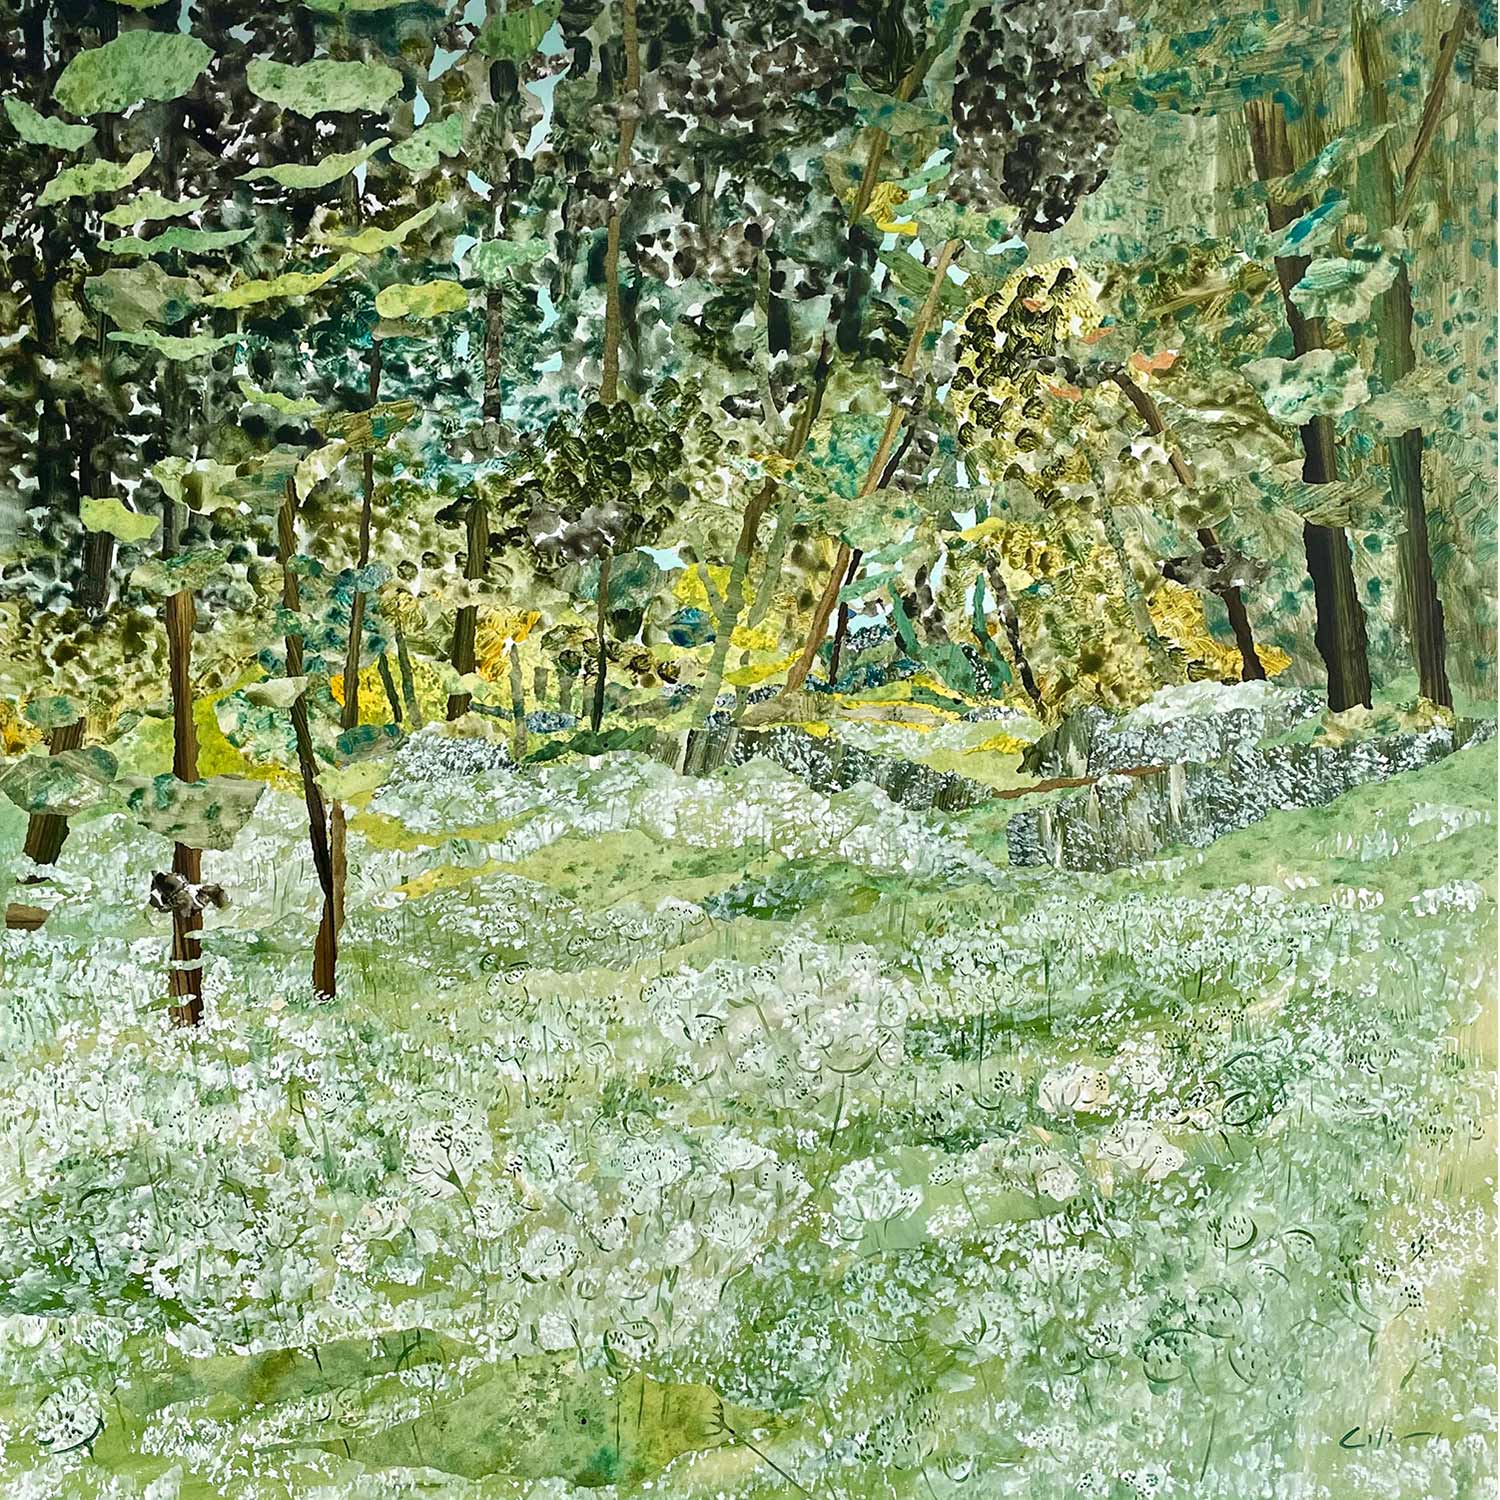 Marzia Colonna 6. Cow parsley amongst the trees 90x90cm collage £7,000